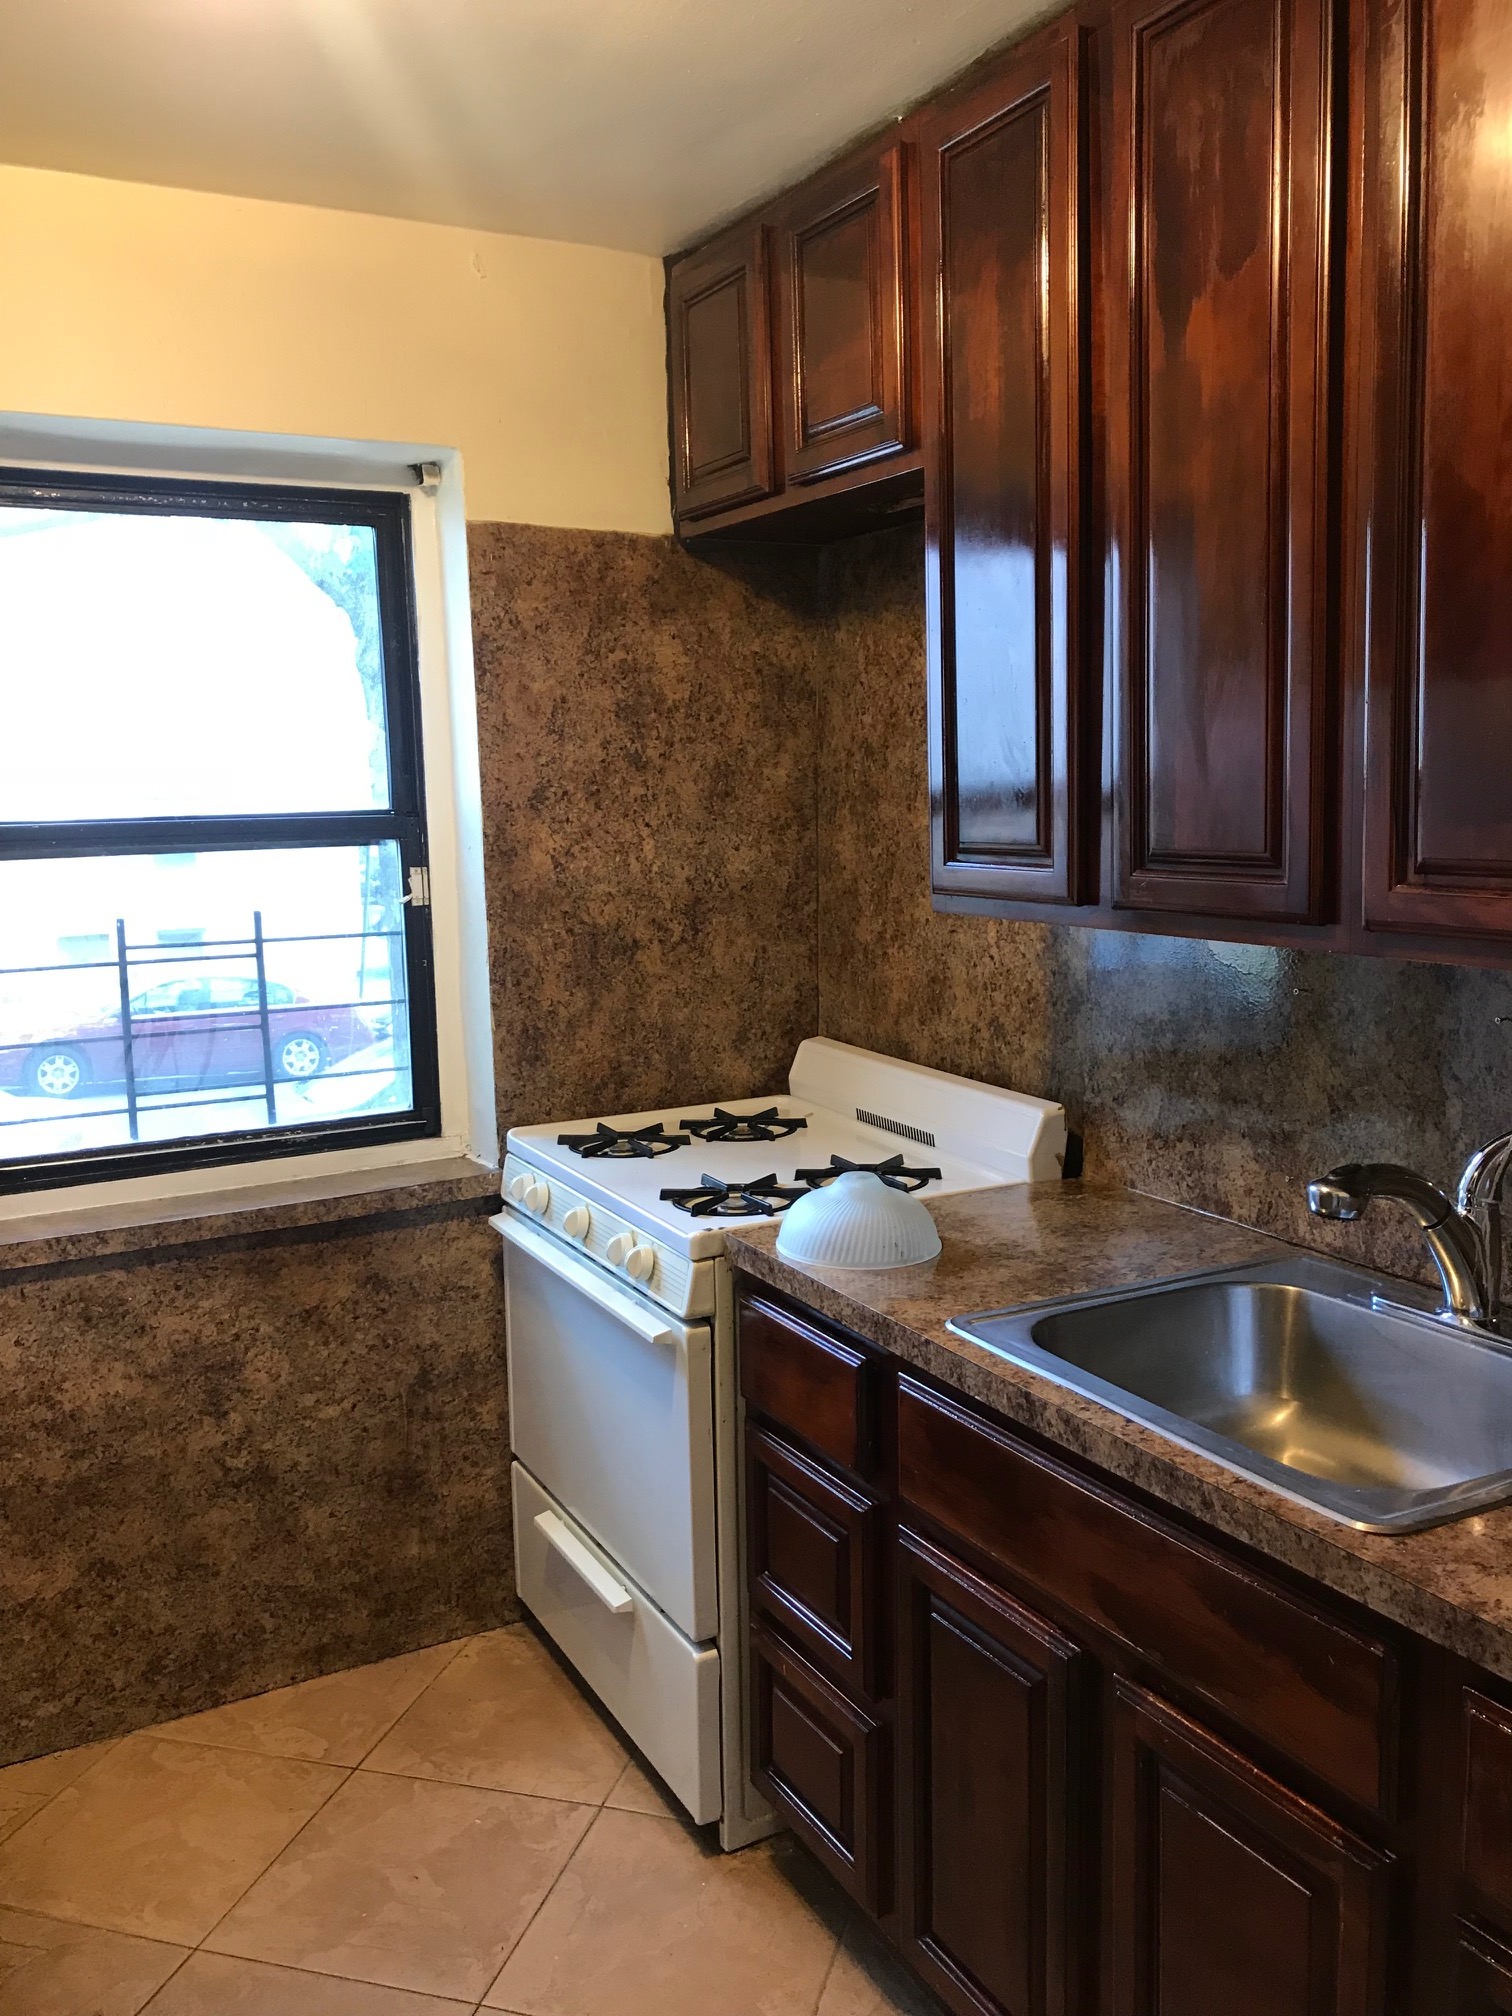 Apartment in Kew Garden Hills - 147th Street  Queens, NY 11367